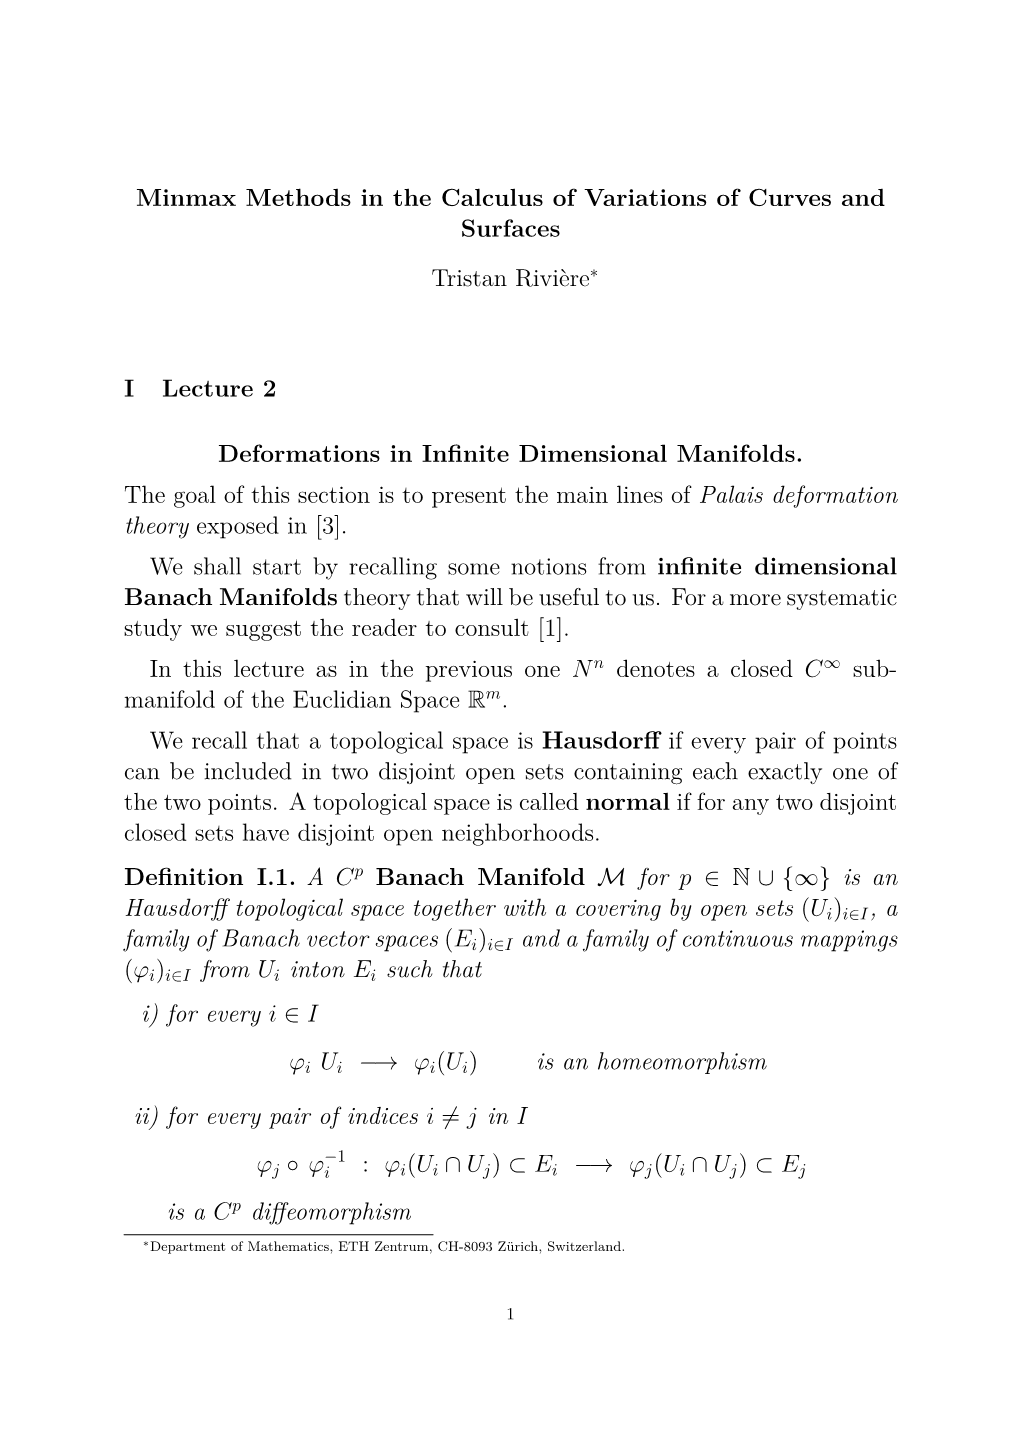 Lecture 2. Palais Deformation Theory in Infinite Dimensional Banach